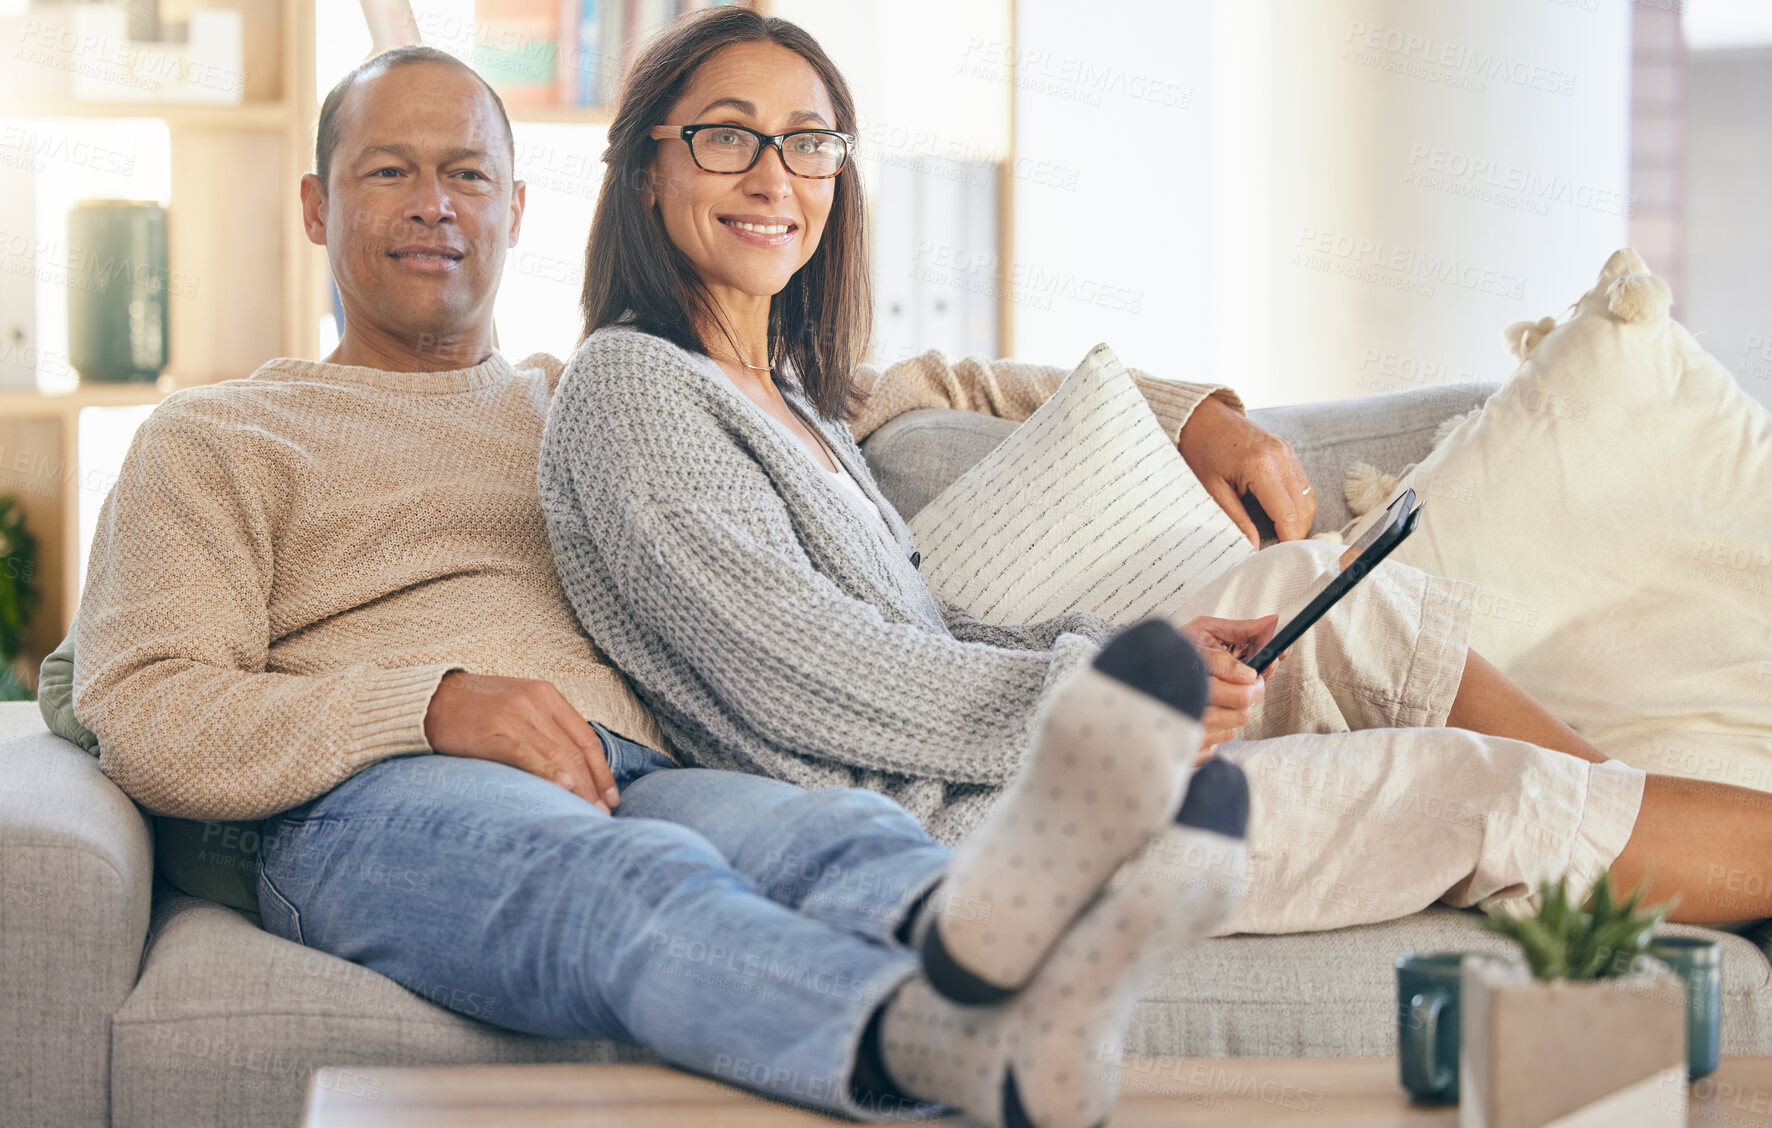 Buy stock photo Mature couple, tablet and relax portrait on sofa together for love, support and romance bonding in living room at home. Man smile, happy woman, and romantic quality time on couch with tech device